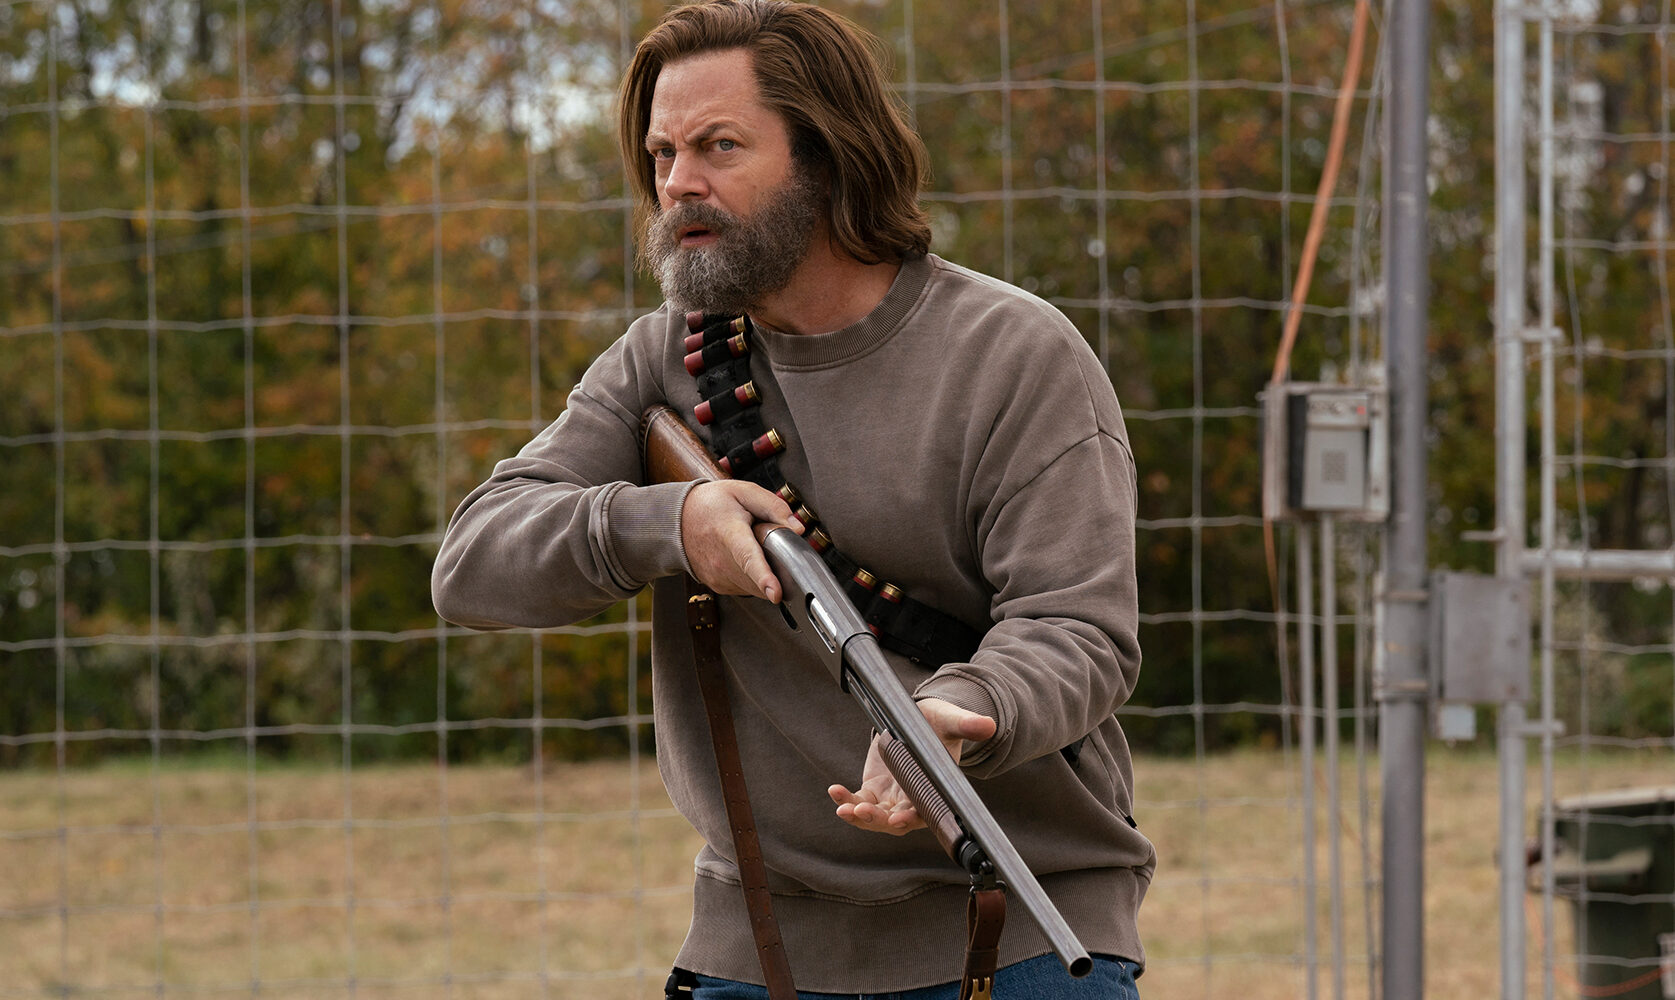 A screenshot from The Last of Us shows Nick Offerman, a beareded man with long hair, holding a shotgun.